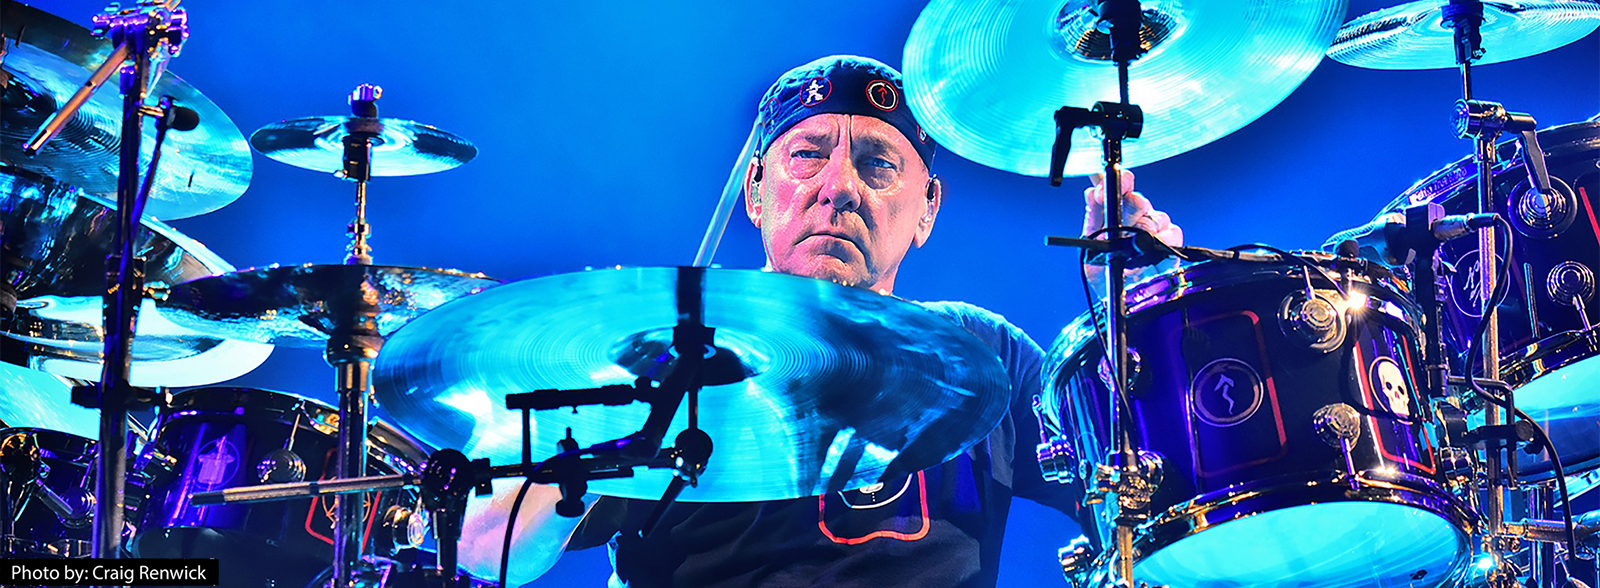 Neil Peart sits performing at his drum kit